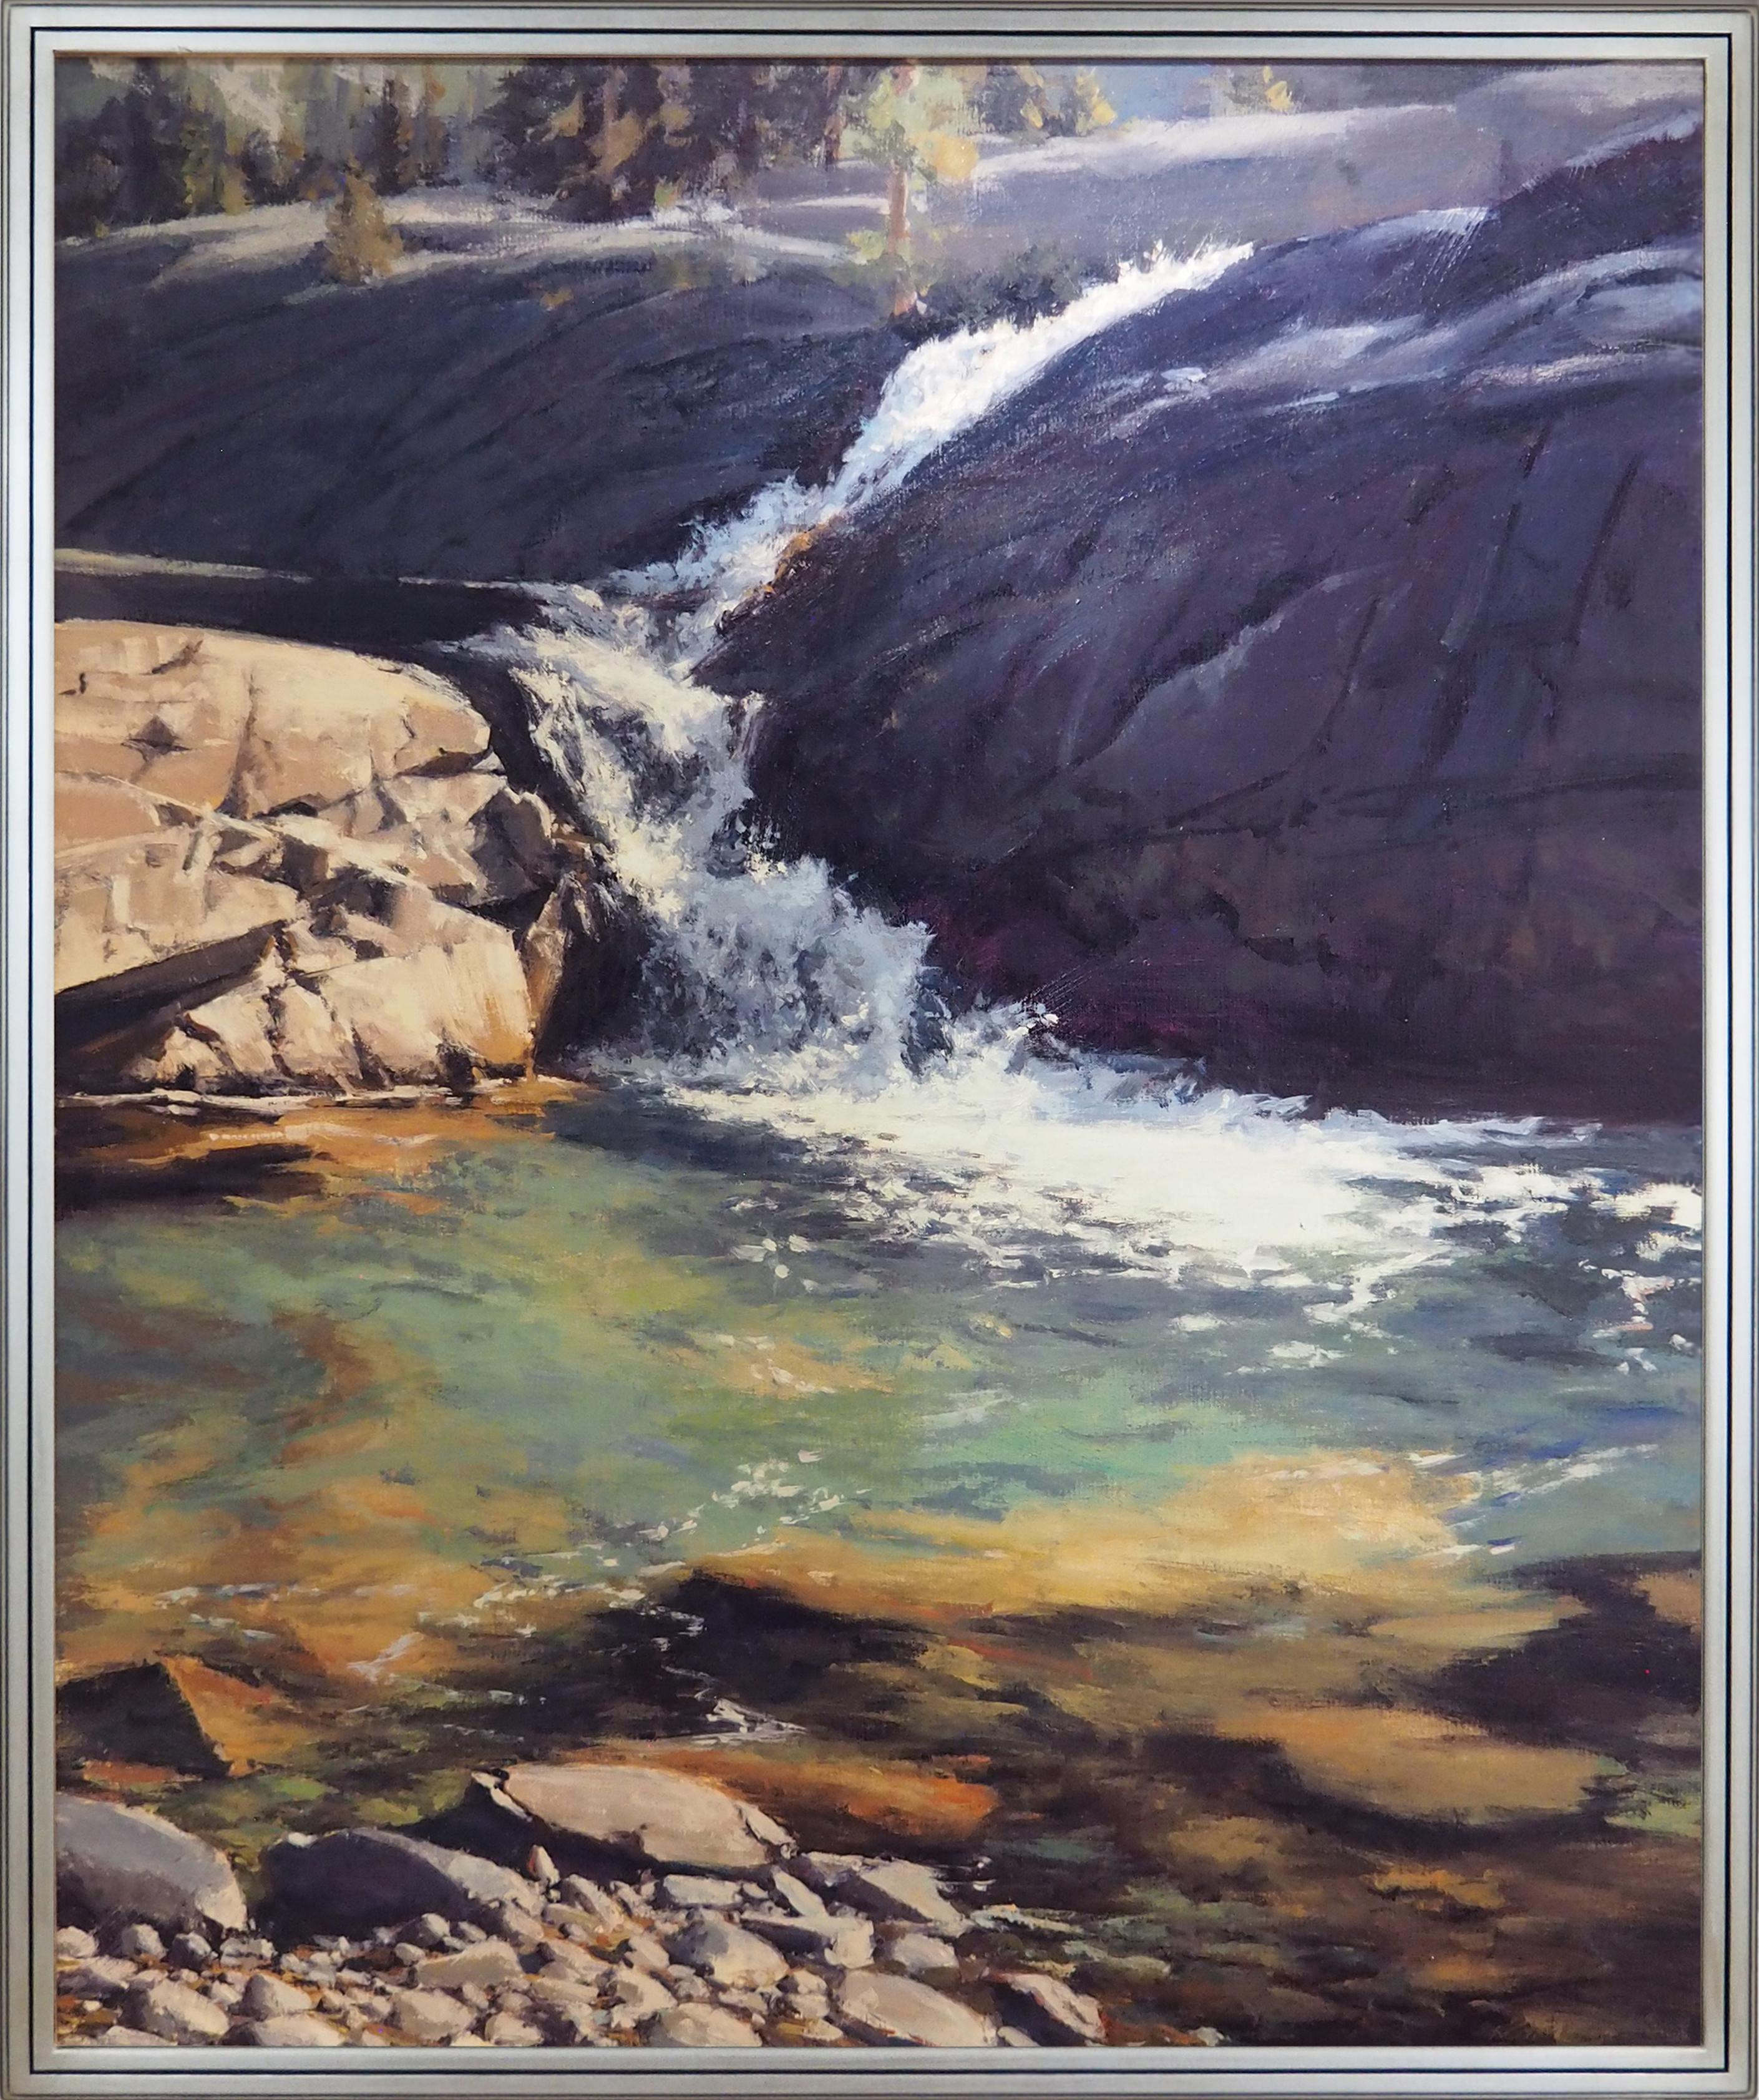 Kate Starling Landscape Painting - High Mountain Falls (Landscape, Colorado, Waterfall, Coors)